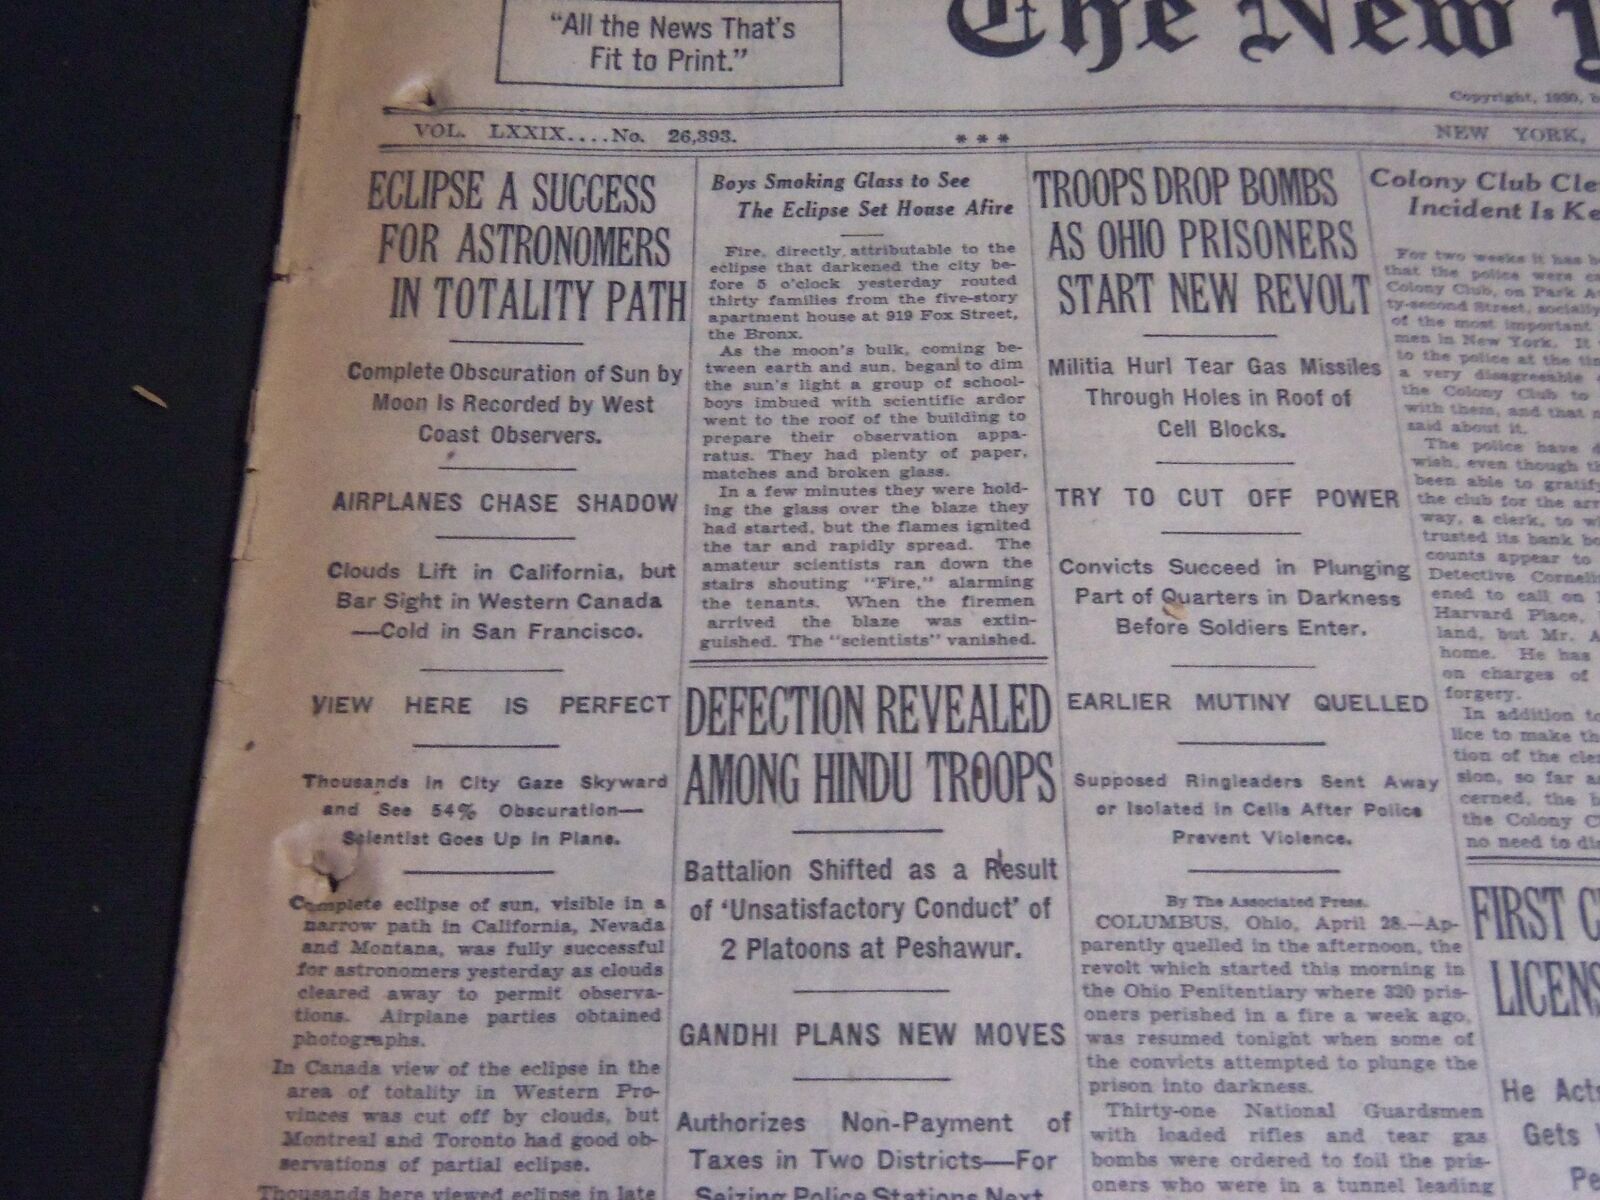 1930 APRIL 29 NEW YORK TIMES - ECLIPSE A SUCCESS FOR ASTRONOMERS - NT 6684